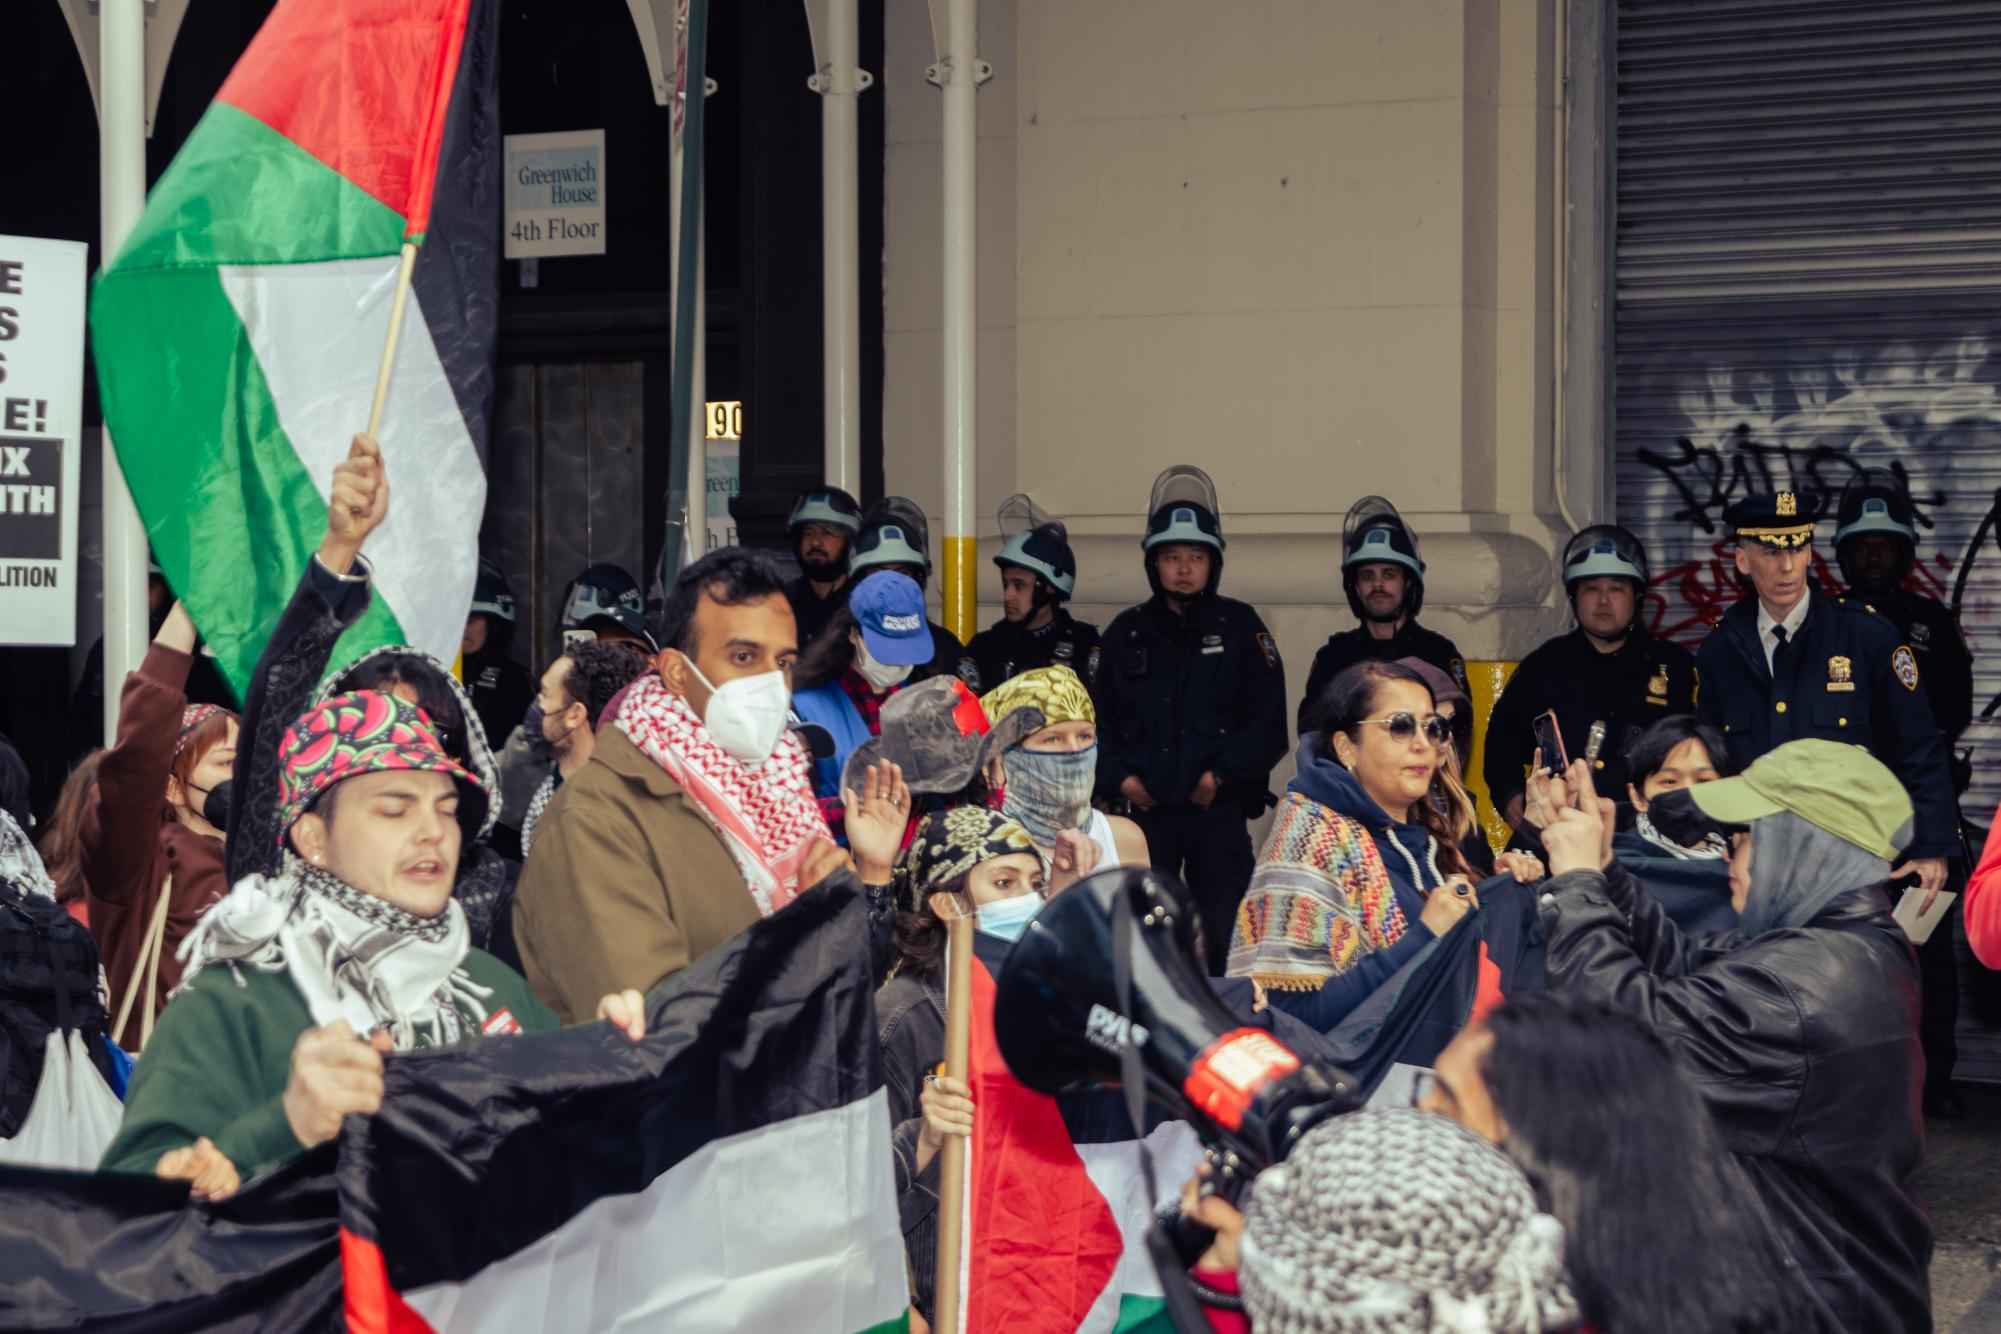 Pro-Palestinian protesters in a march in the foreground and police in riot gear in the background.